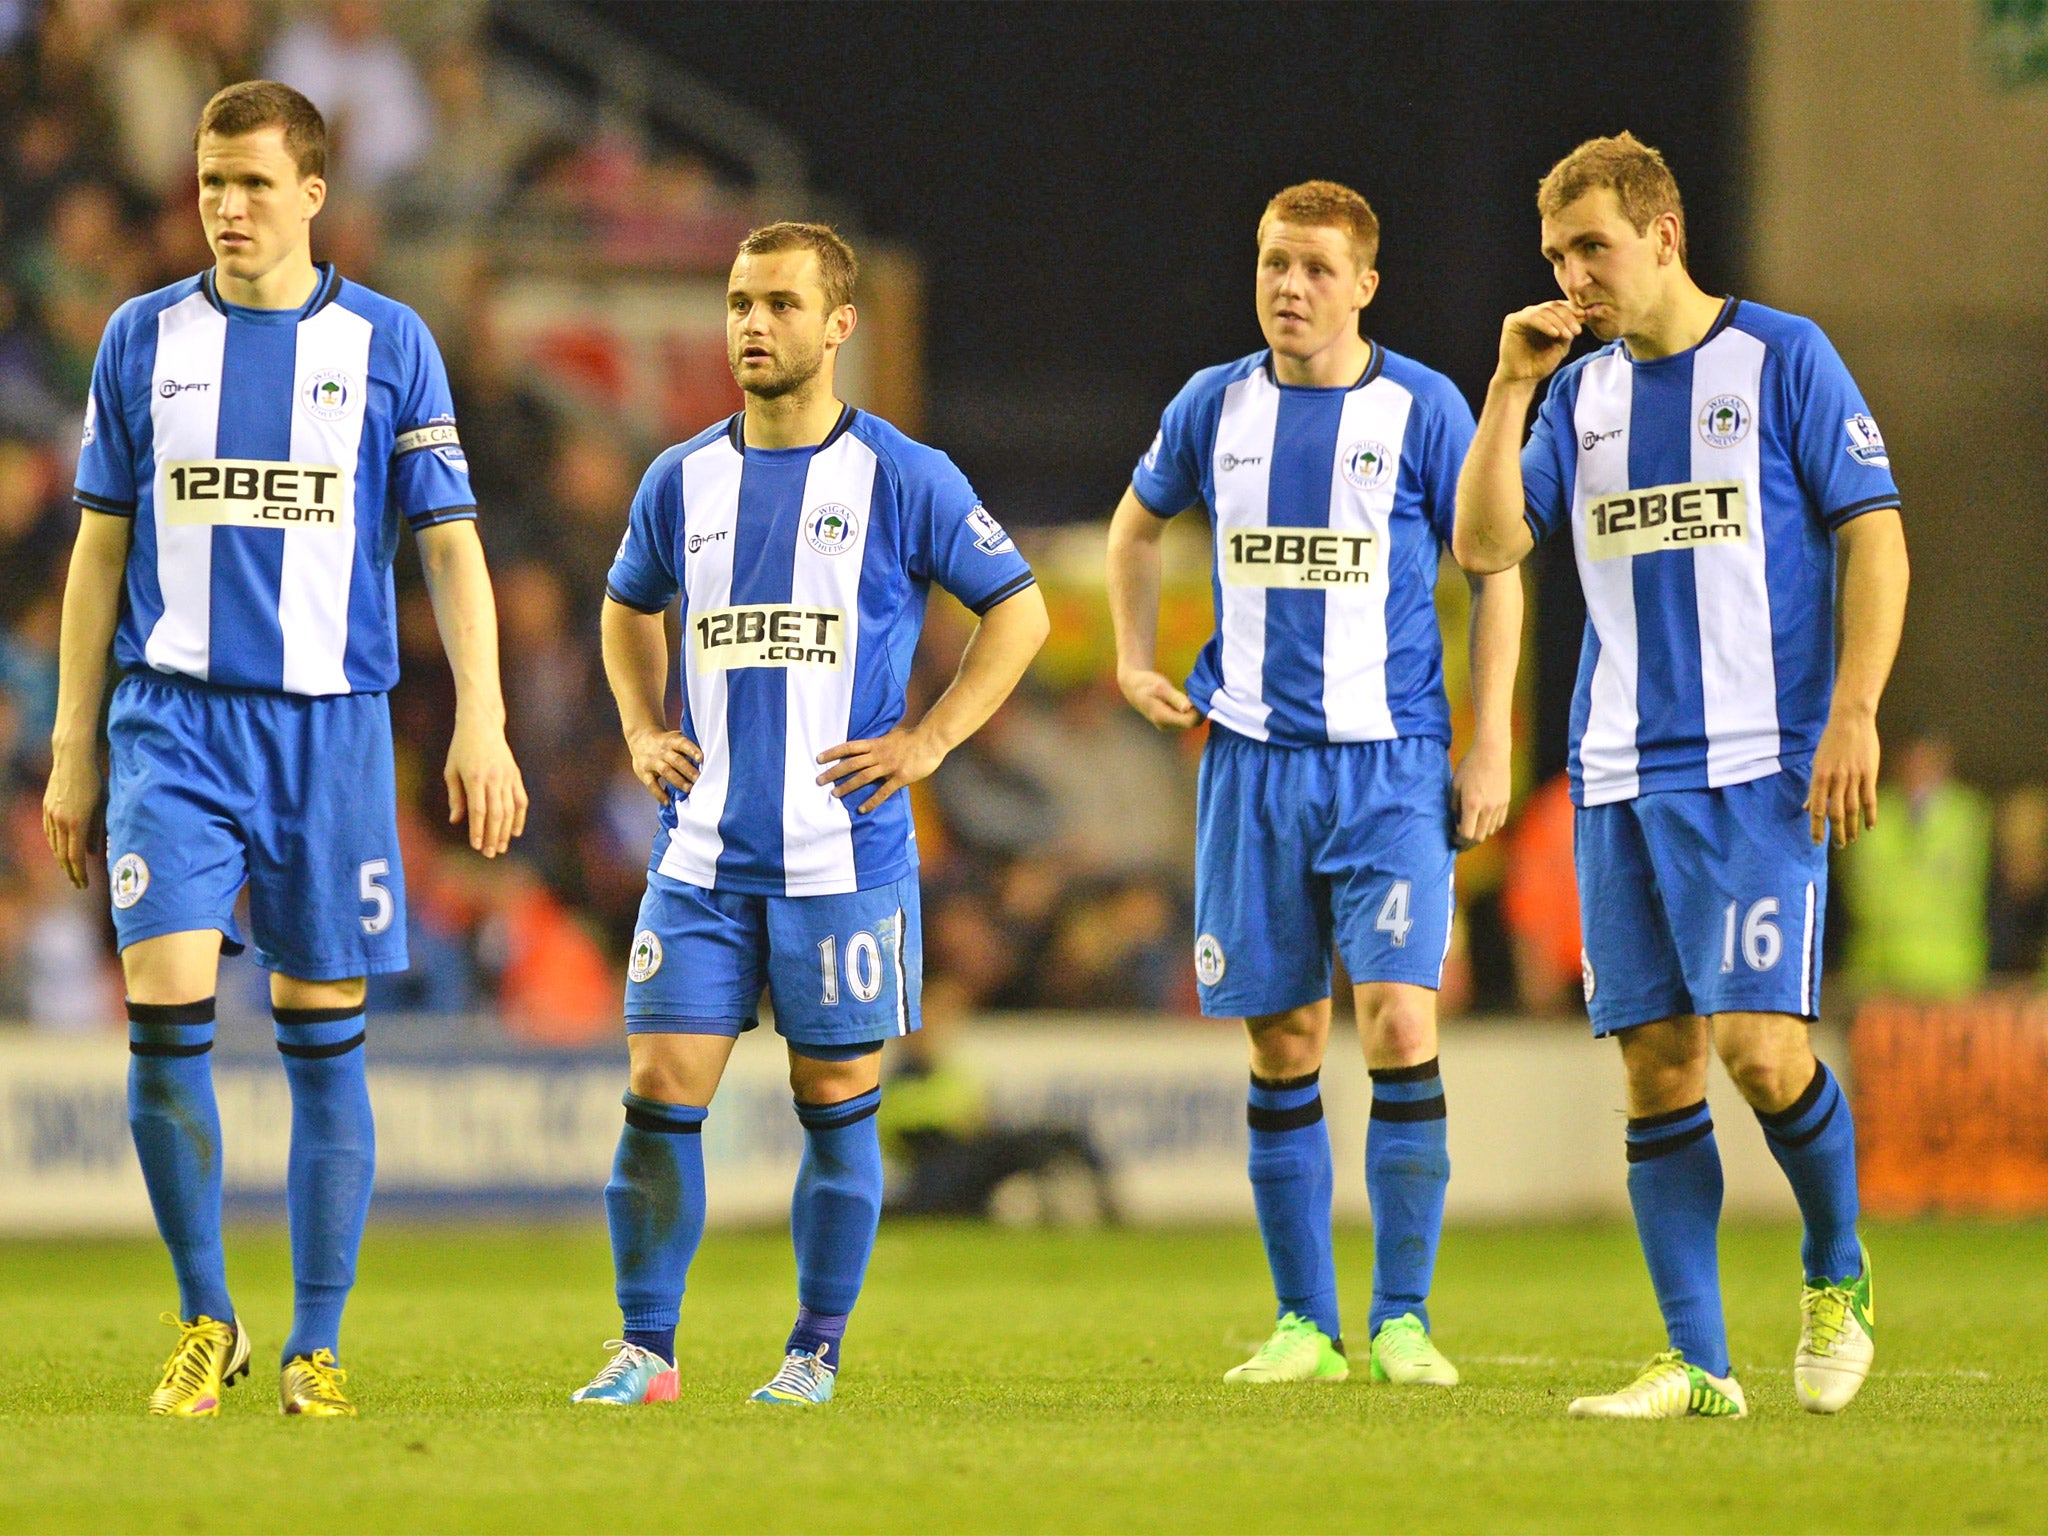 The Wigan players come to terms with what could prove to be a crucial defeat in their last Premier League game against Swansea